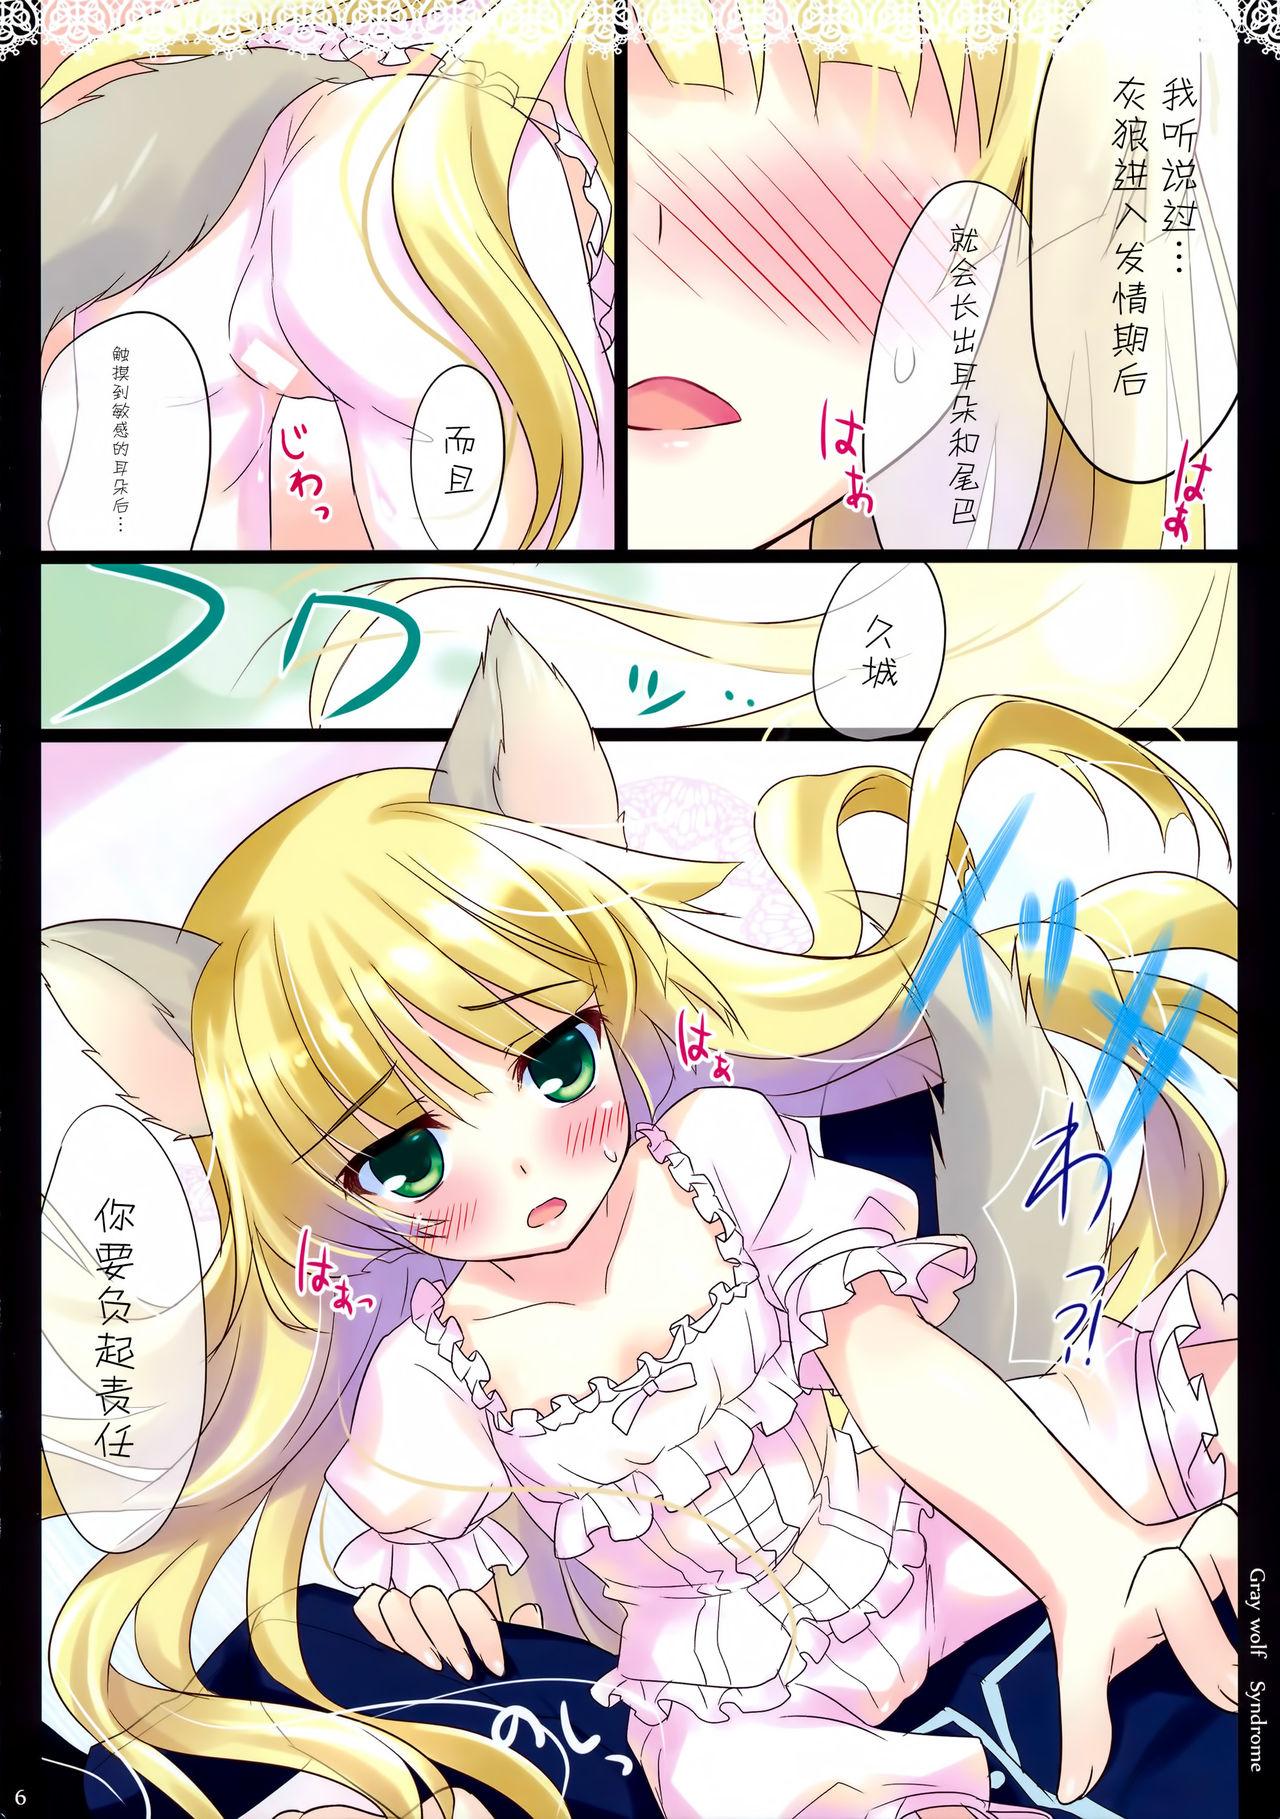 Blondes Gray wolf Syndrome - Gosick Viet - Page 7